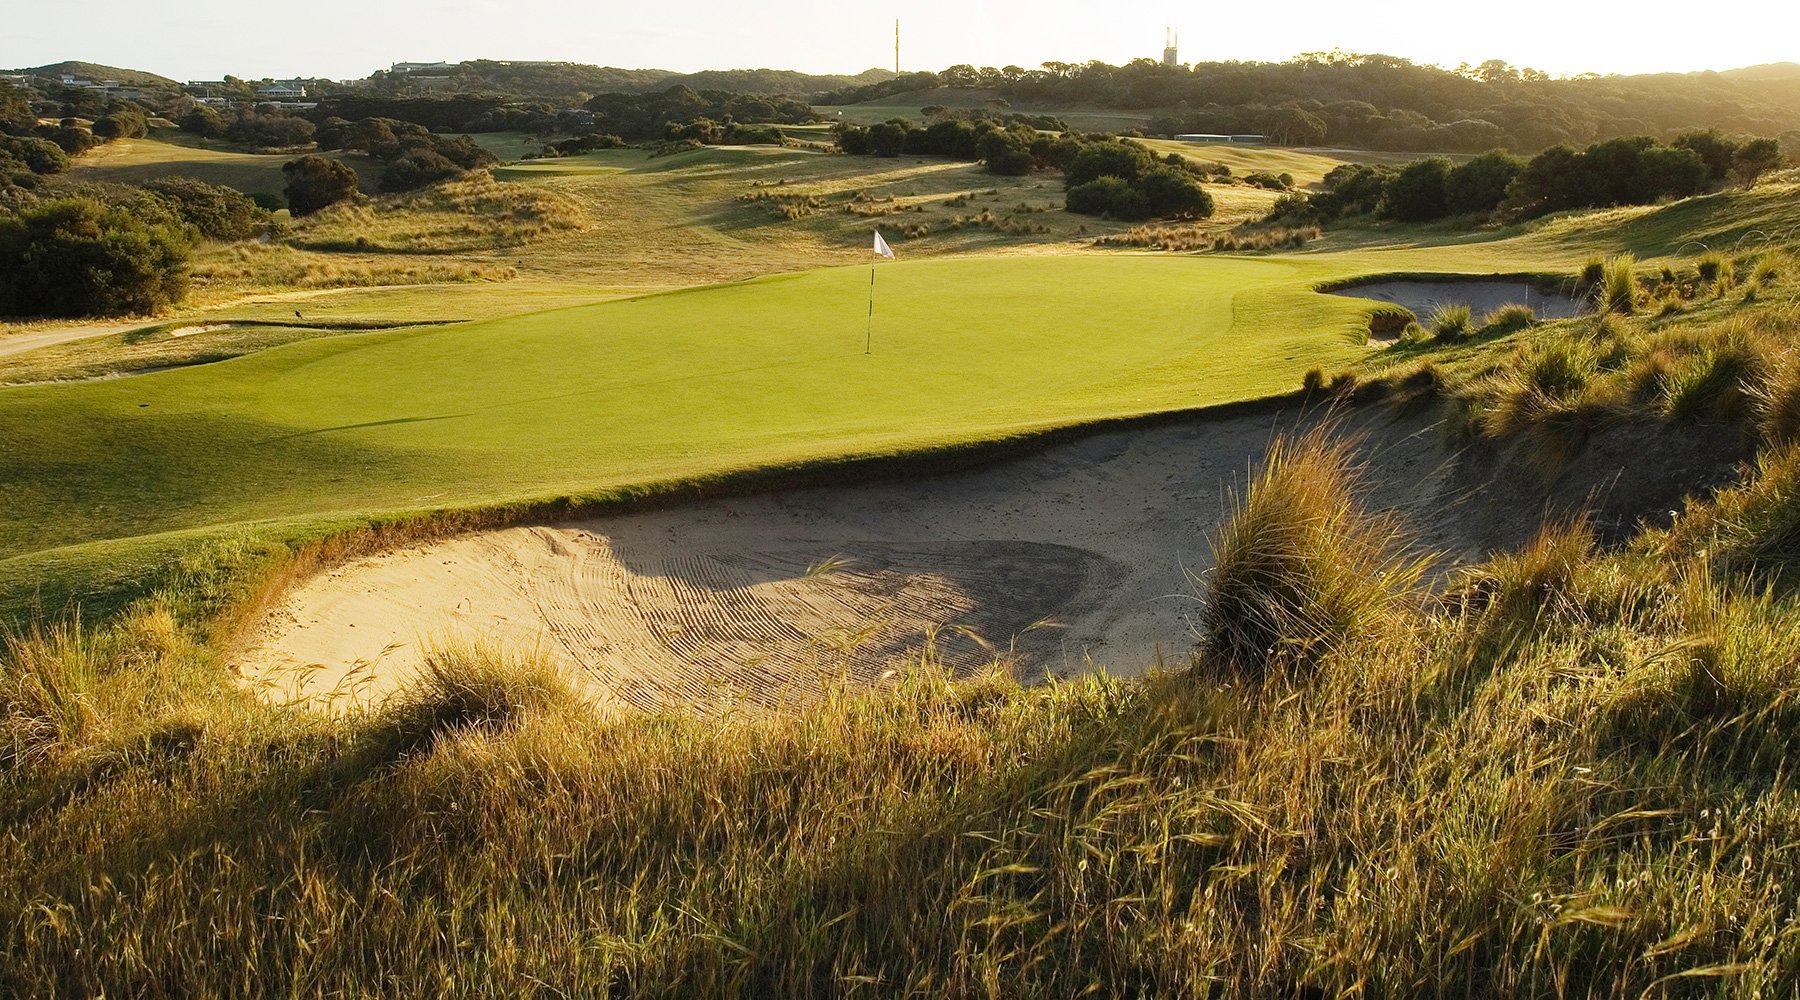 The layout at Portsea is emblematic of many courses on the Mornington Peninsula.